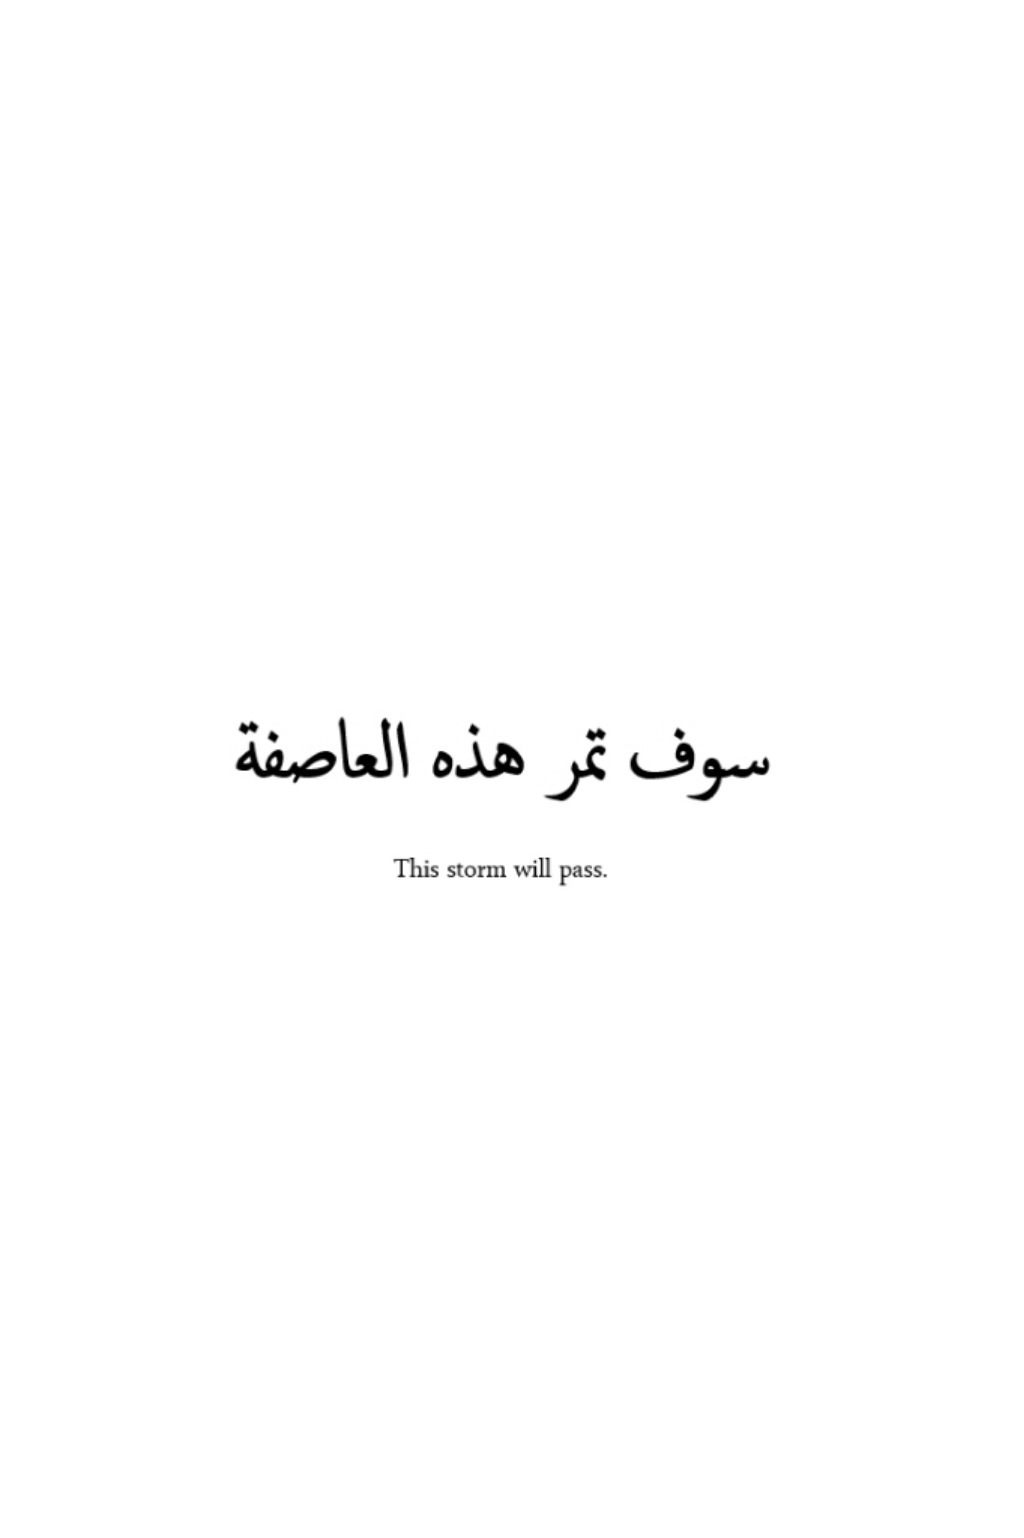 Arabic Love Quotes For Him Arabic Love Quotes For Him Tumblr Dobre For